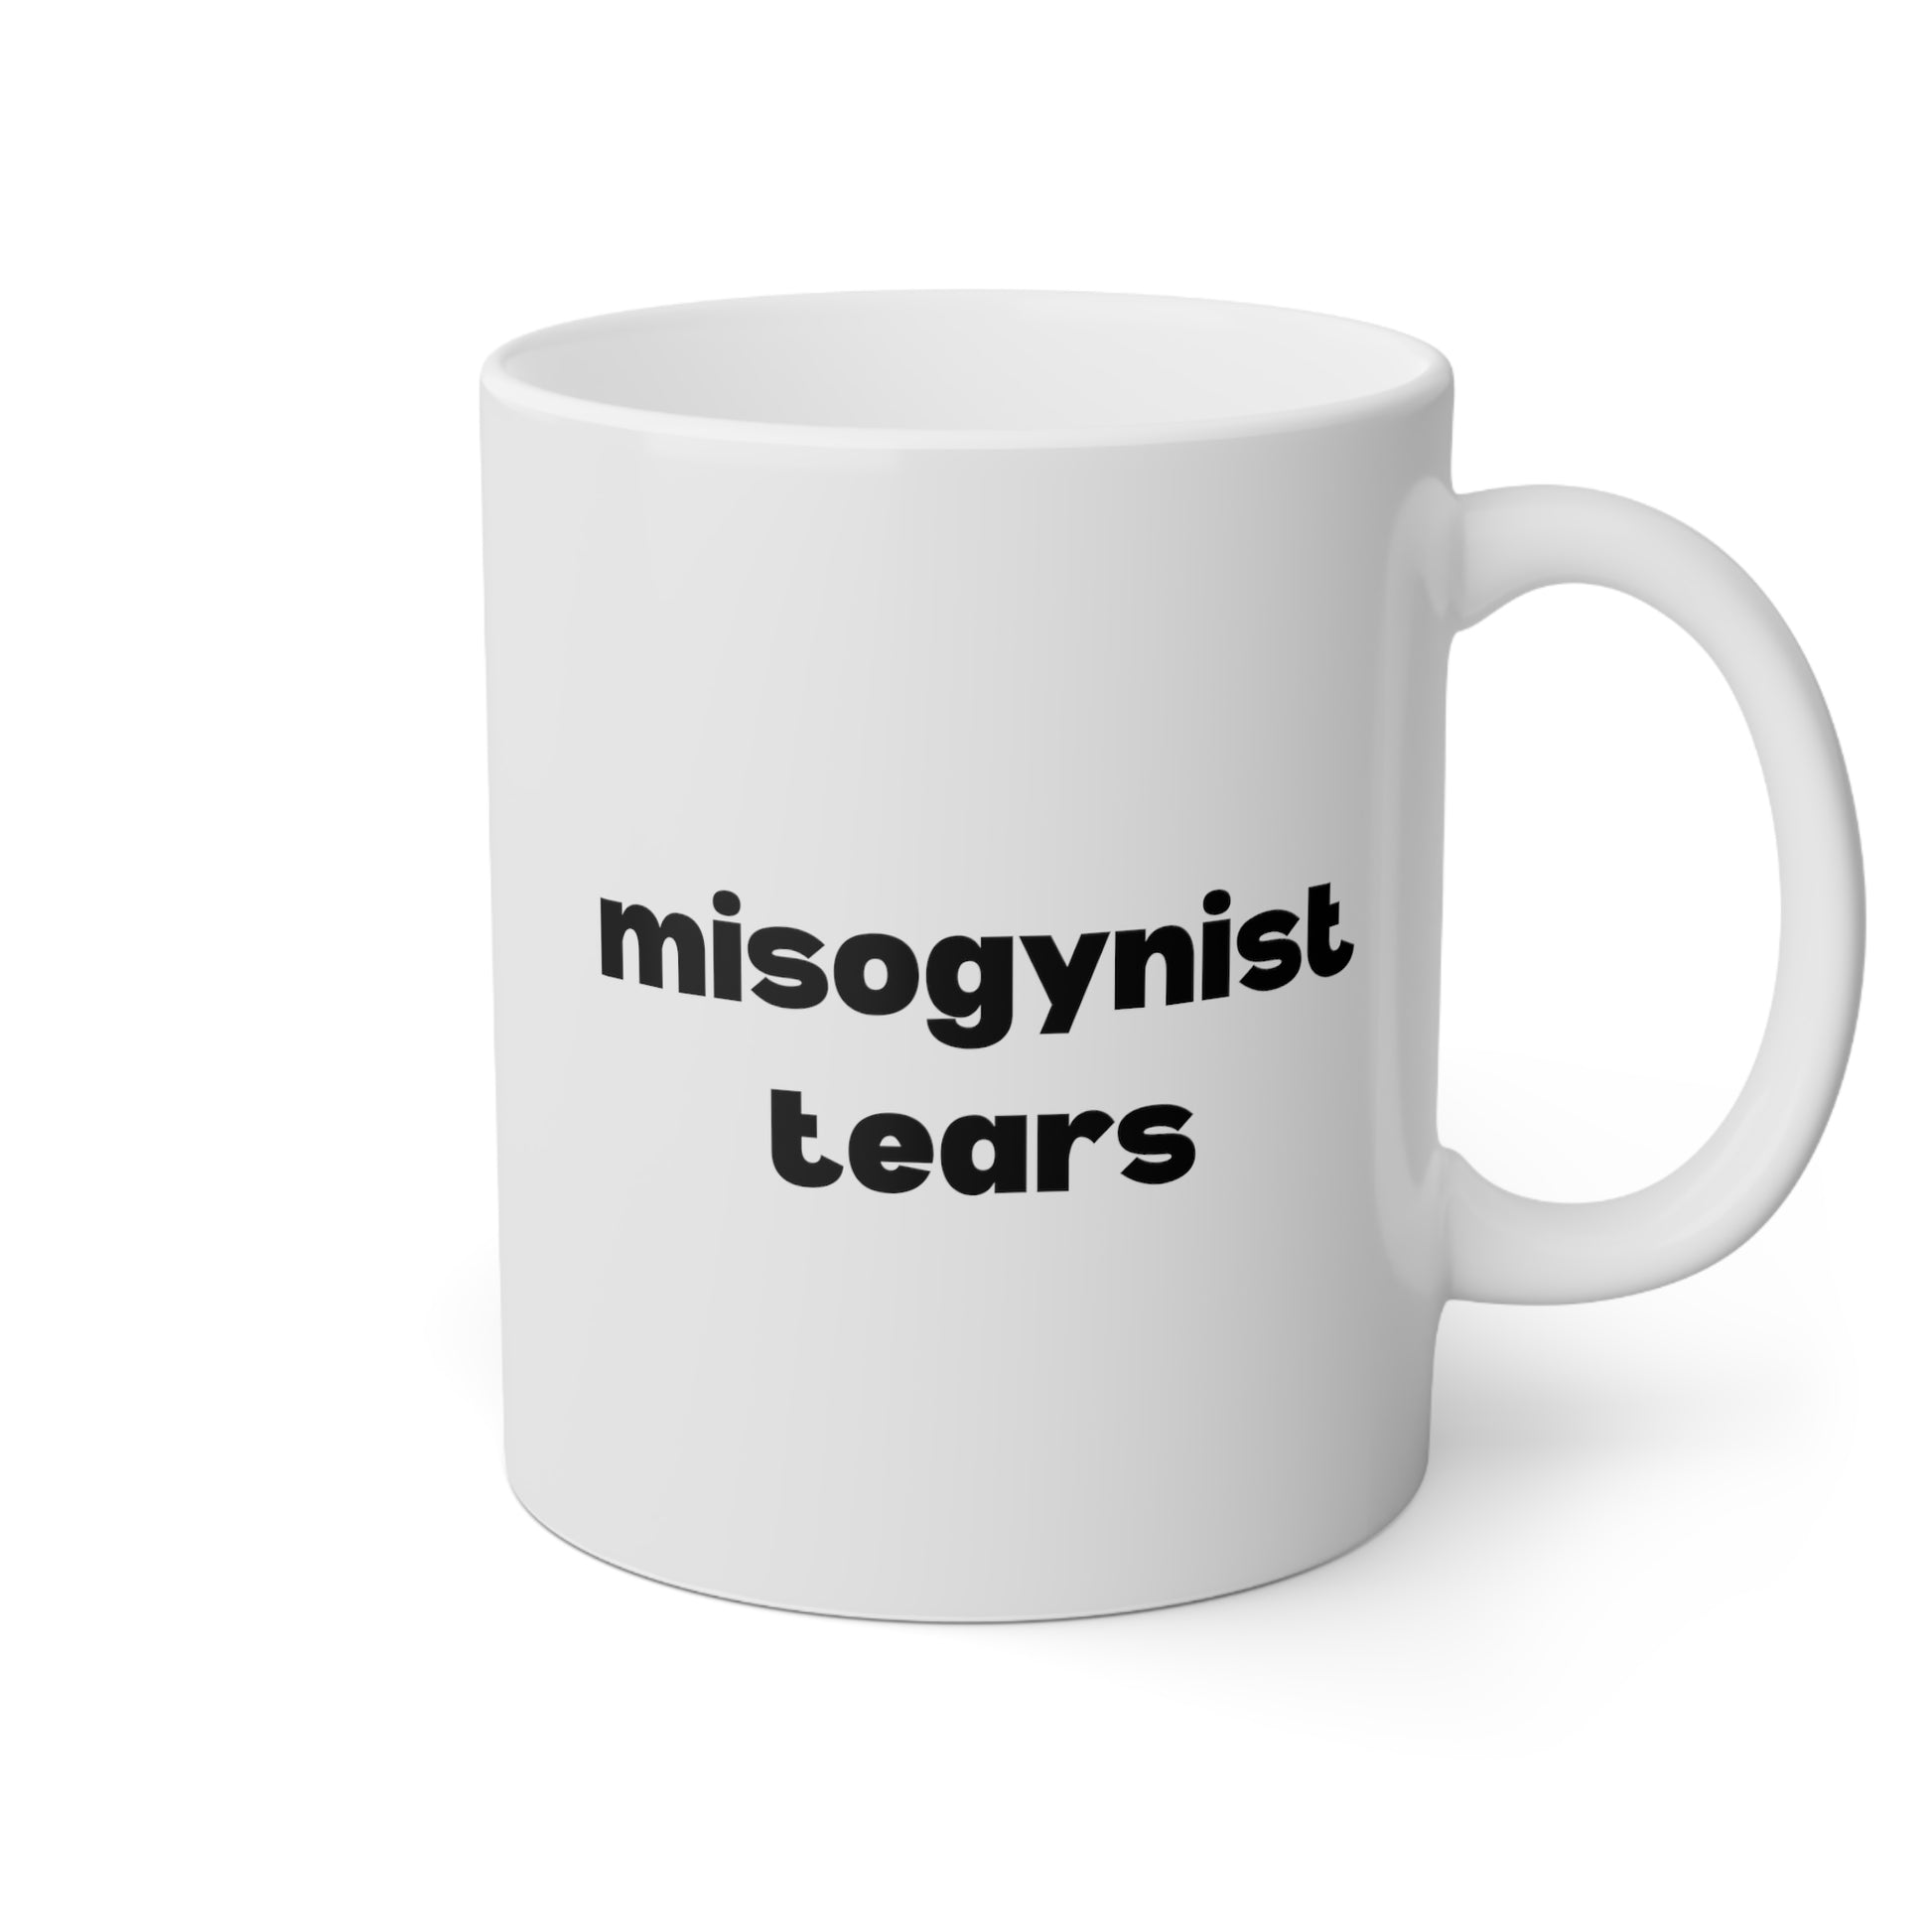 Misogynist Tears 11oz white funny large coffee mug gift for feminist quote feminism she persisted smash the patriarchy waveywares wavey wares wavywares wavy wares